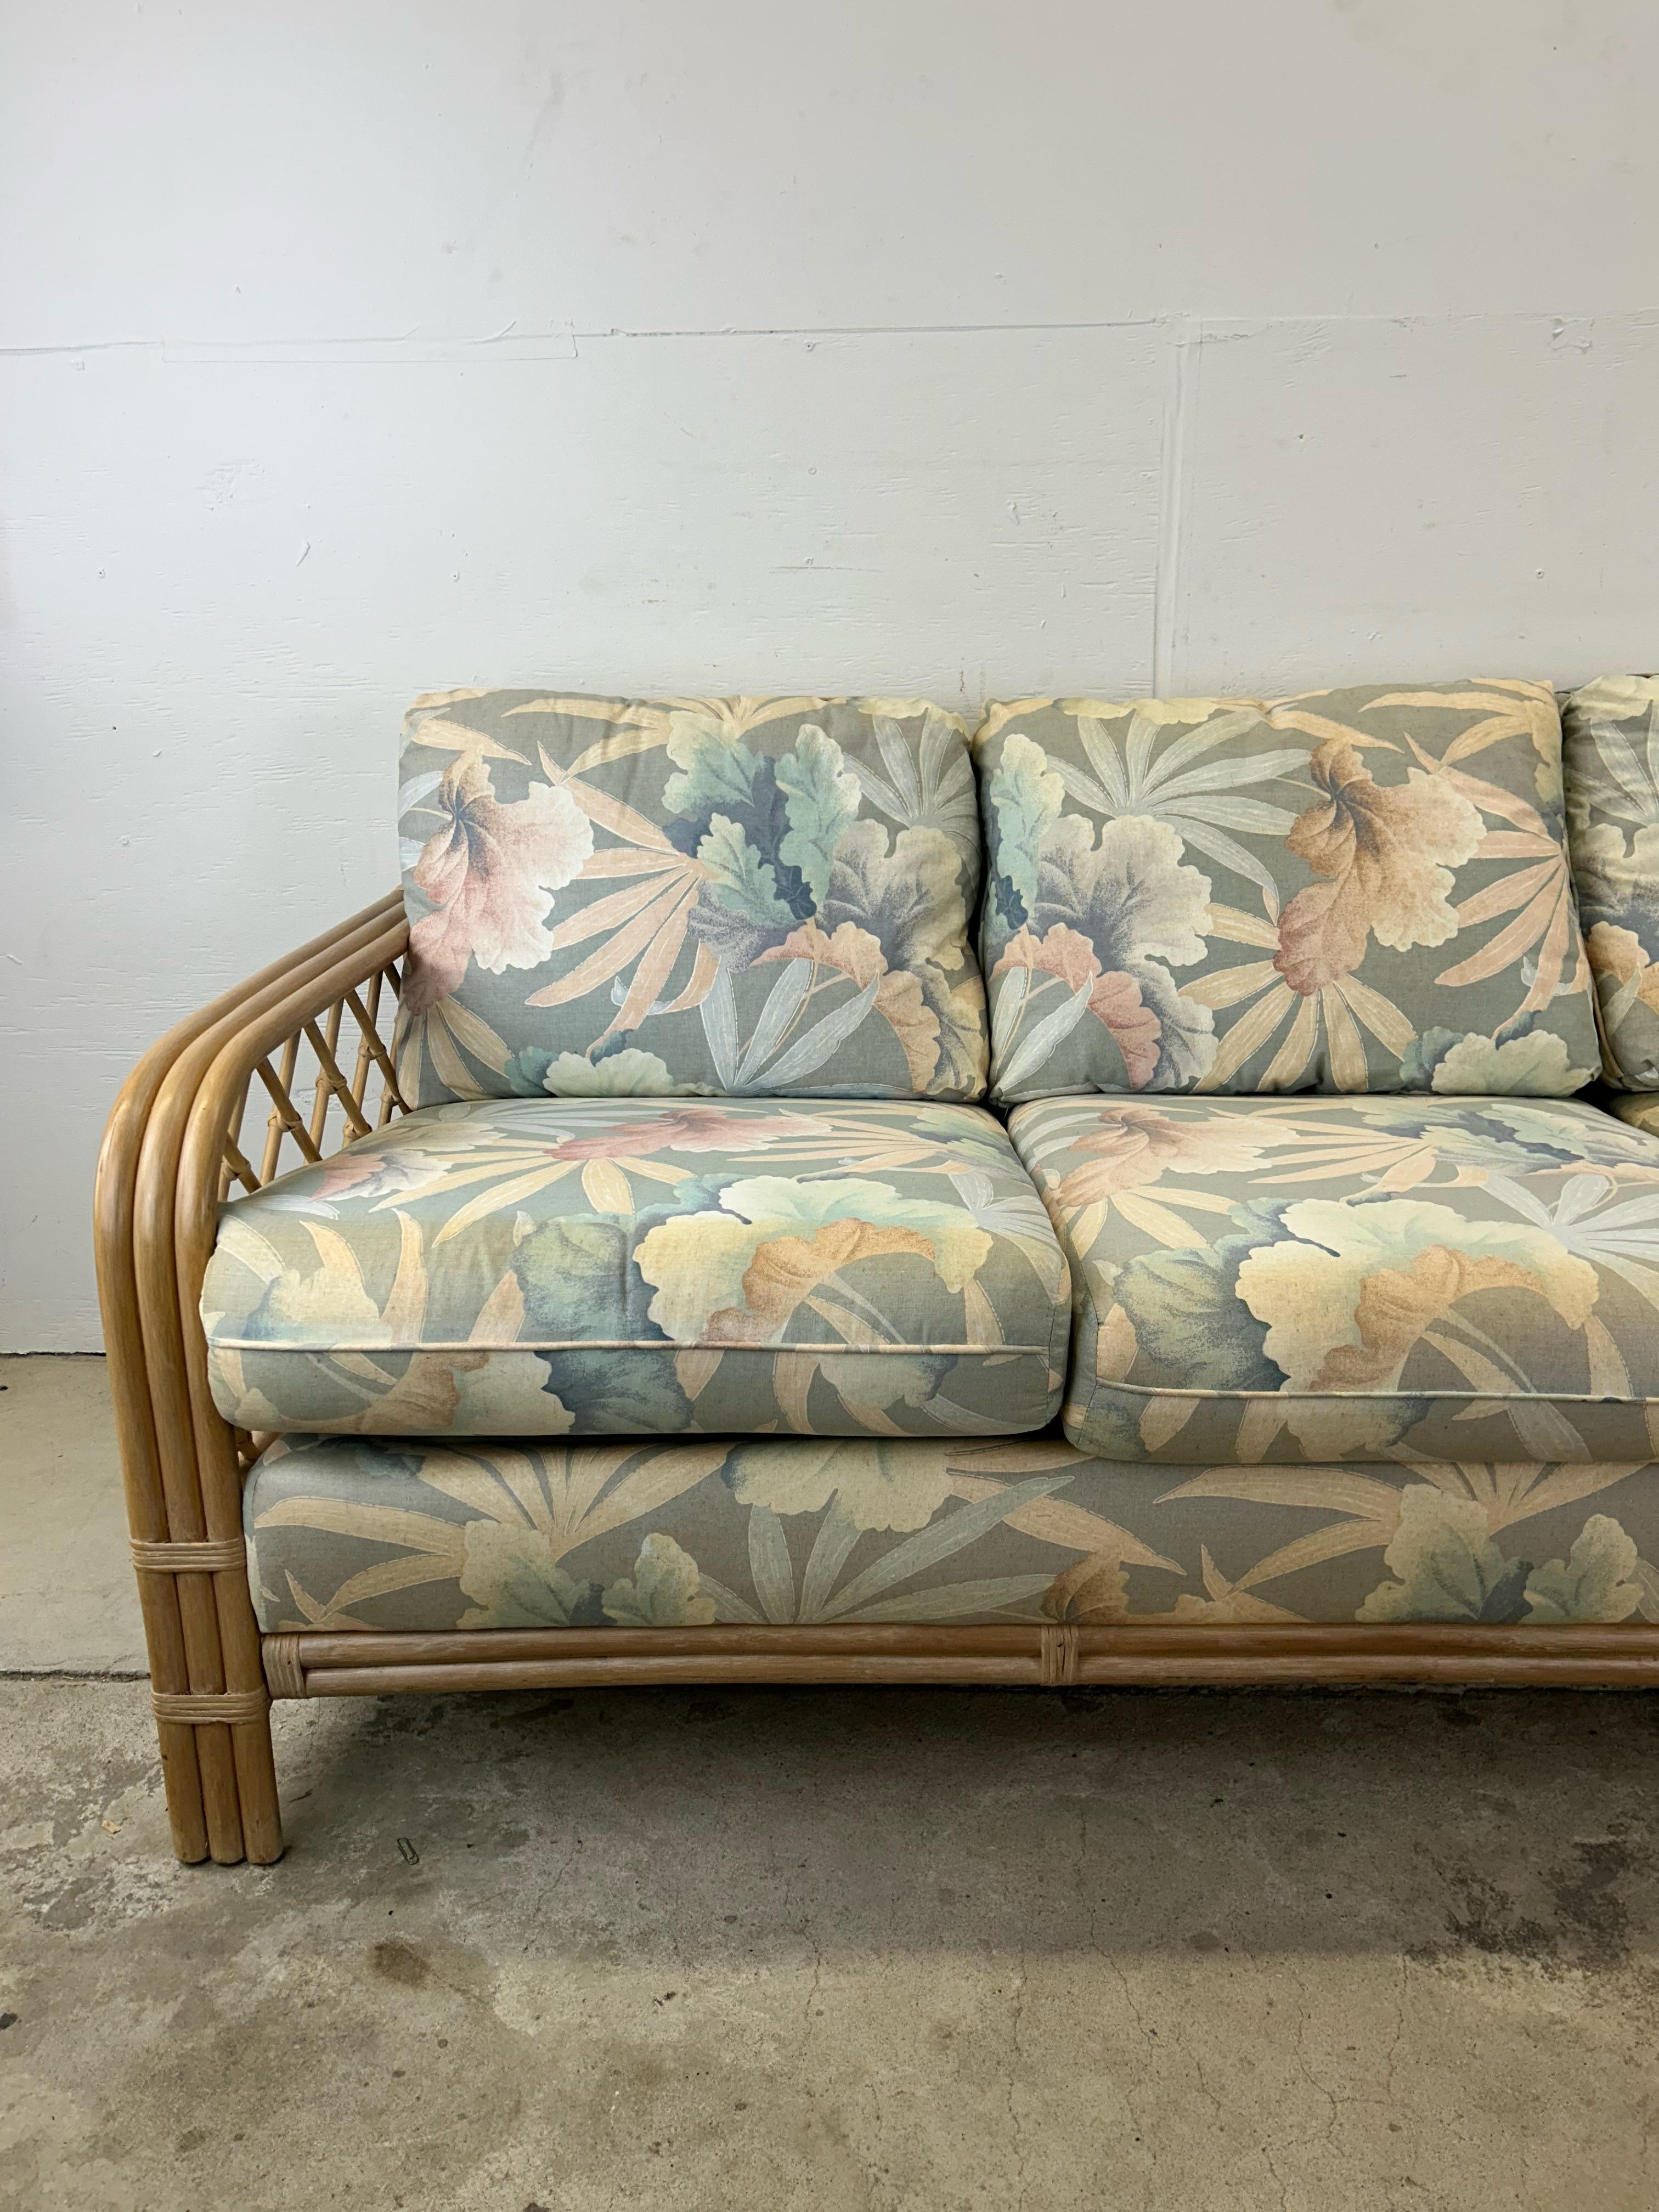 American Vintage Boho Chic Rattan 3 Seater Sofa with Floral Upholstery For Sale